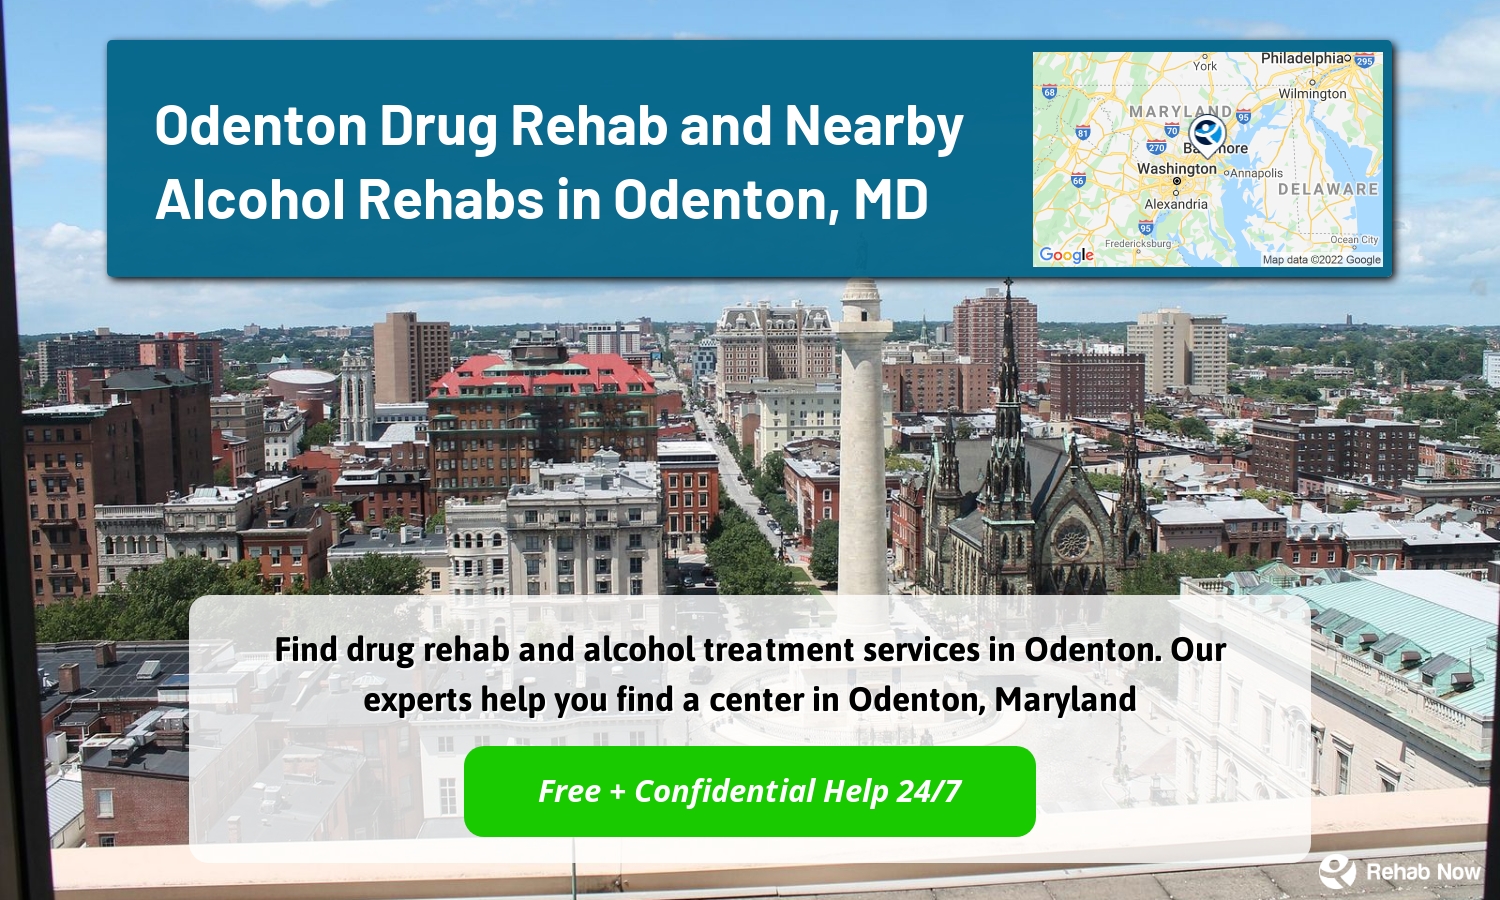 Find drug rehab and alcohol treatment services in Odenton. Our experts help you find a center in Odenton, Maryland